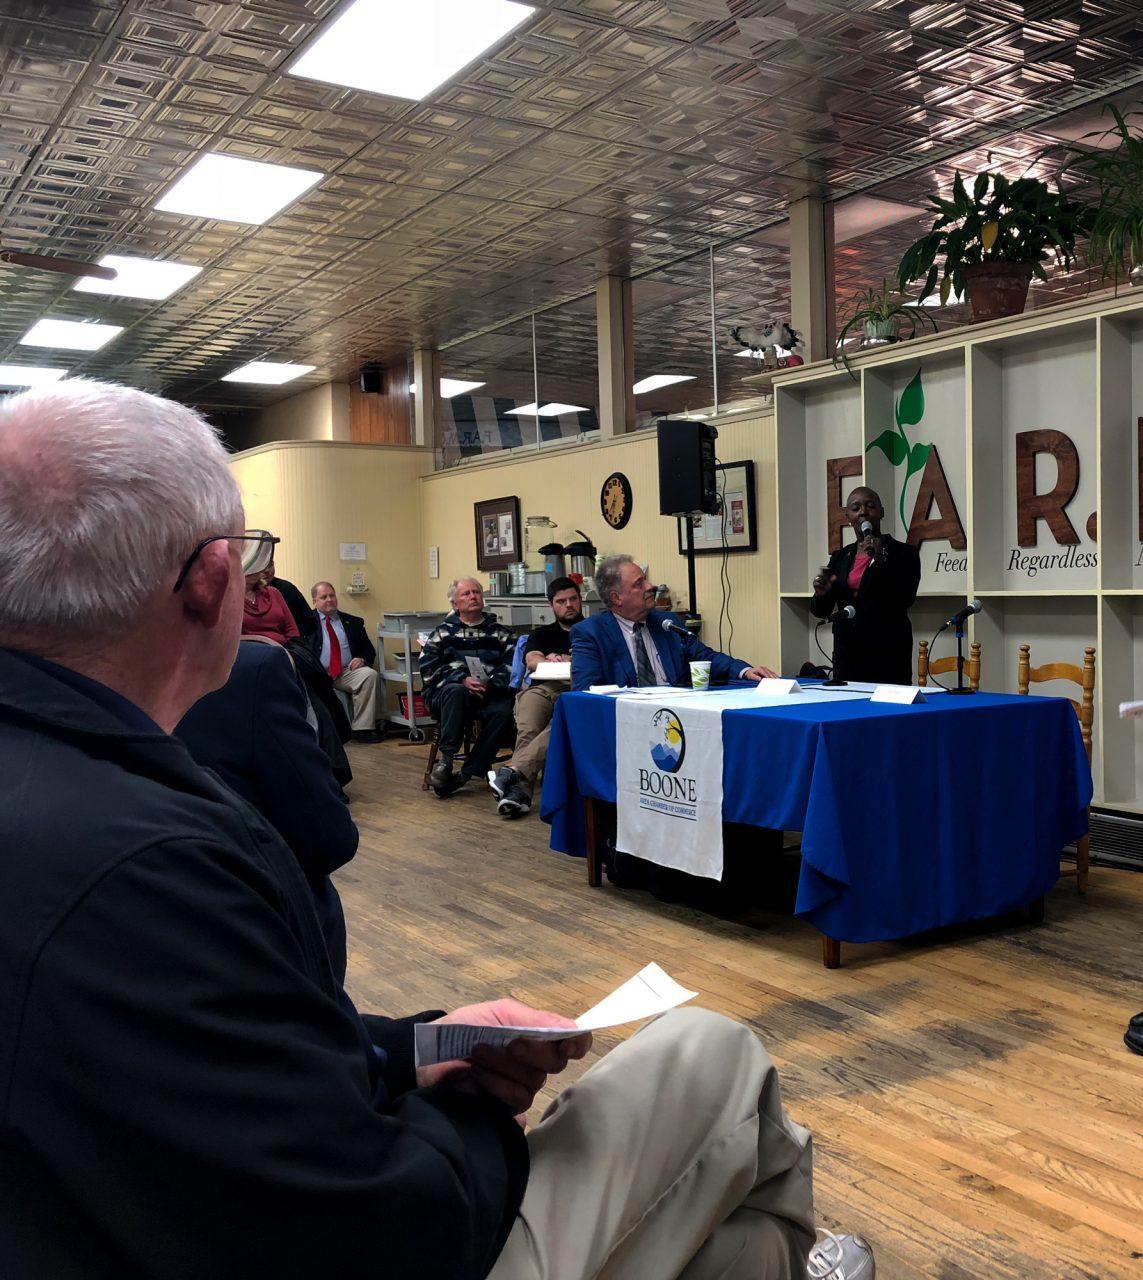 Primary candidate for the fifth US congressional district DD Adams speaks. Republican and Democratic candidates running for seats in the 2018 midterms gathered at F.A.R.M. cafe for a forum on Monday night.